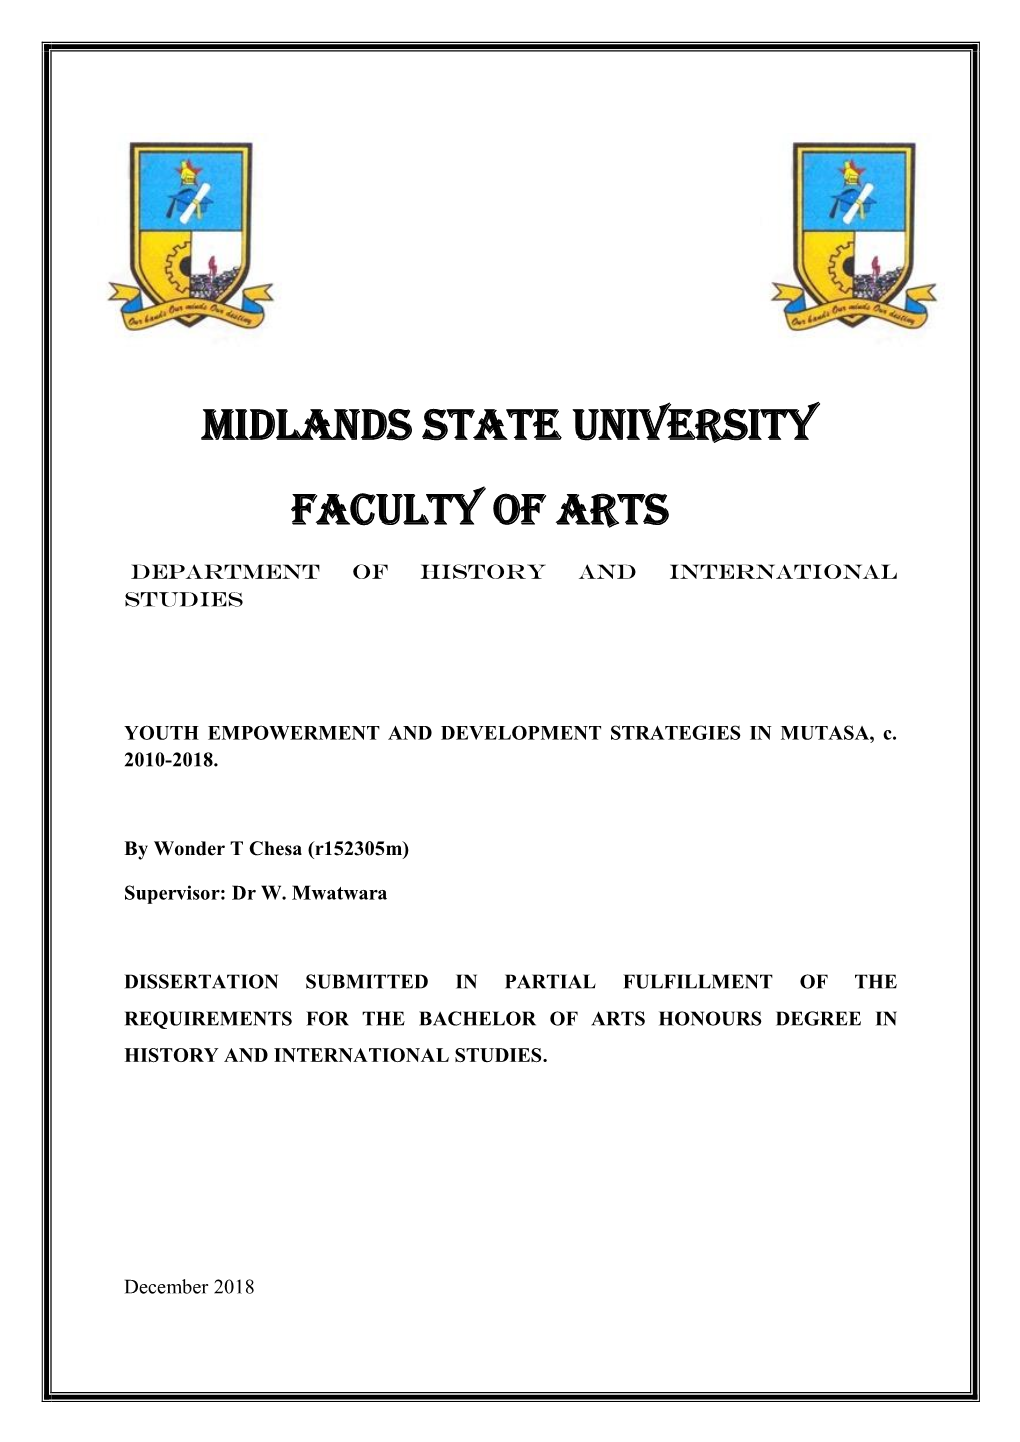 MIDLANDS STATE UNIVERSITY Faculty of Arts